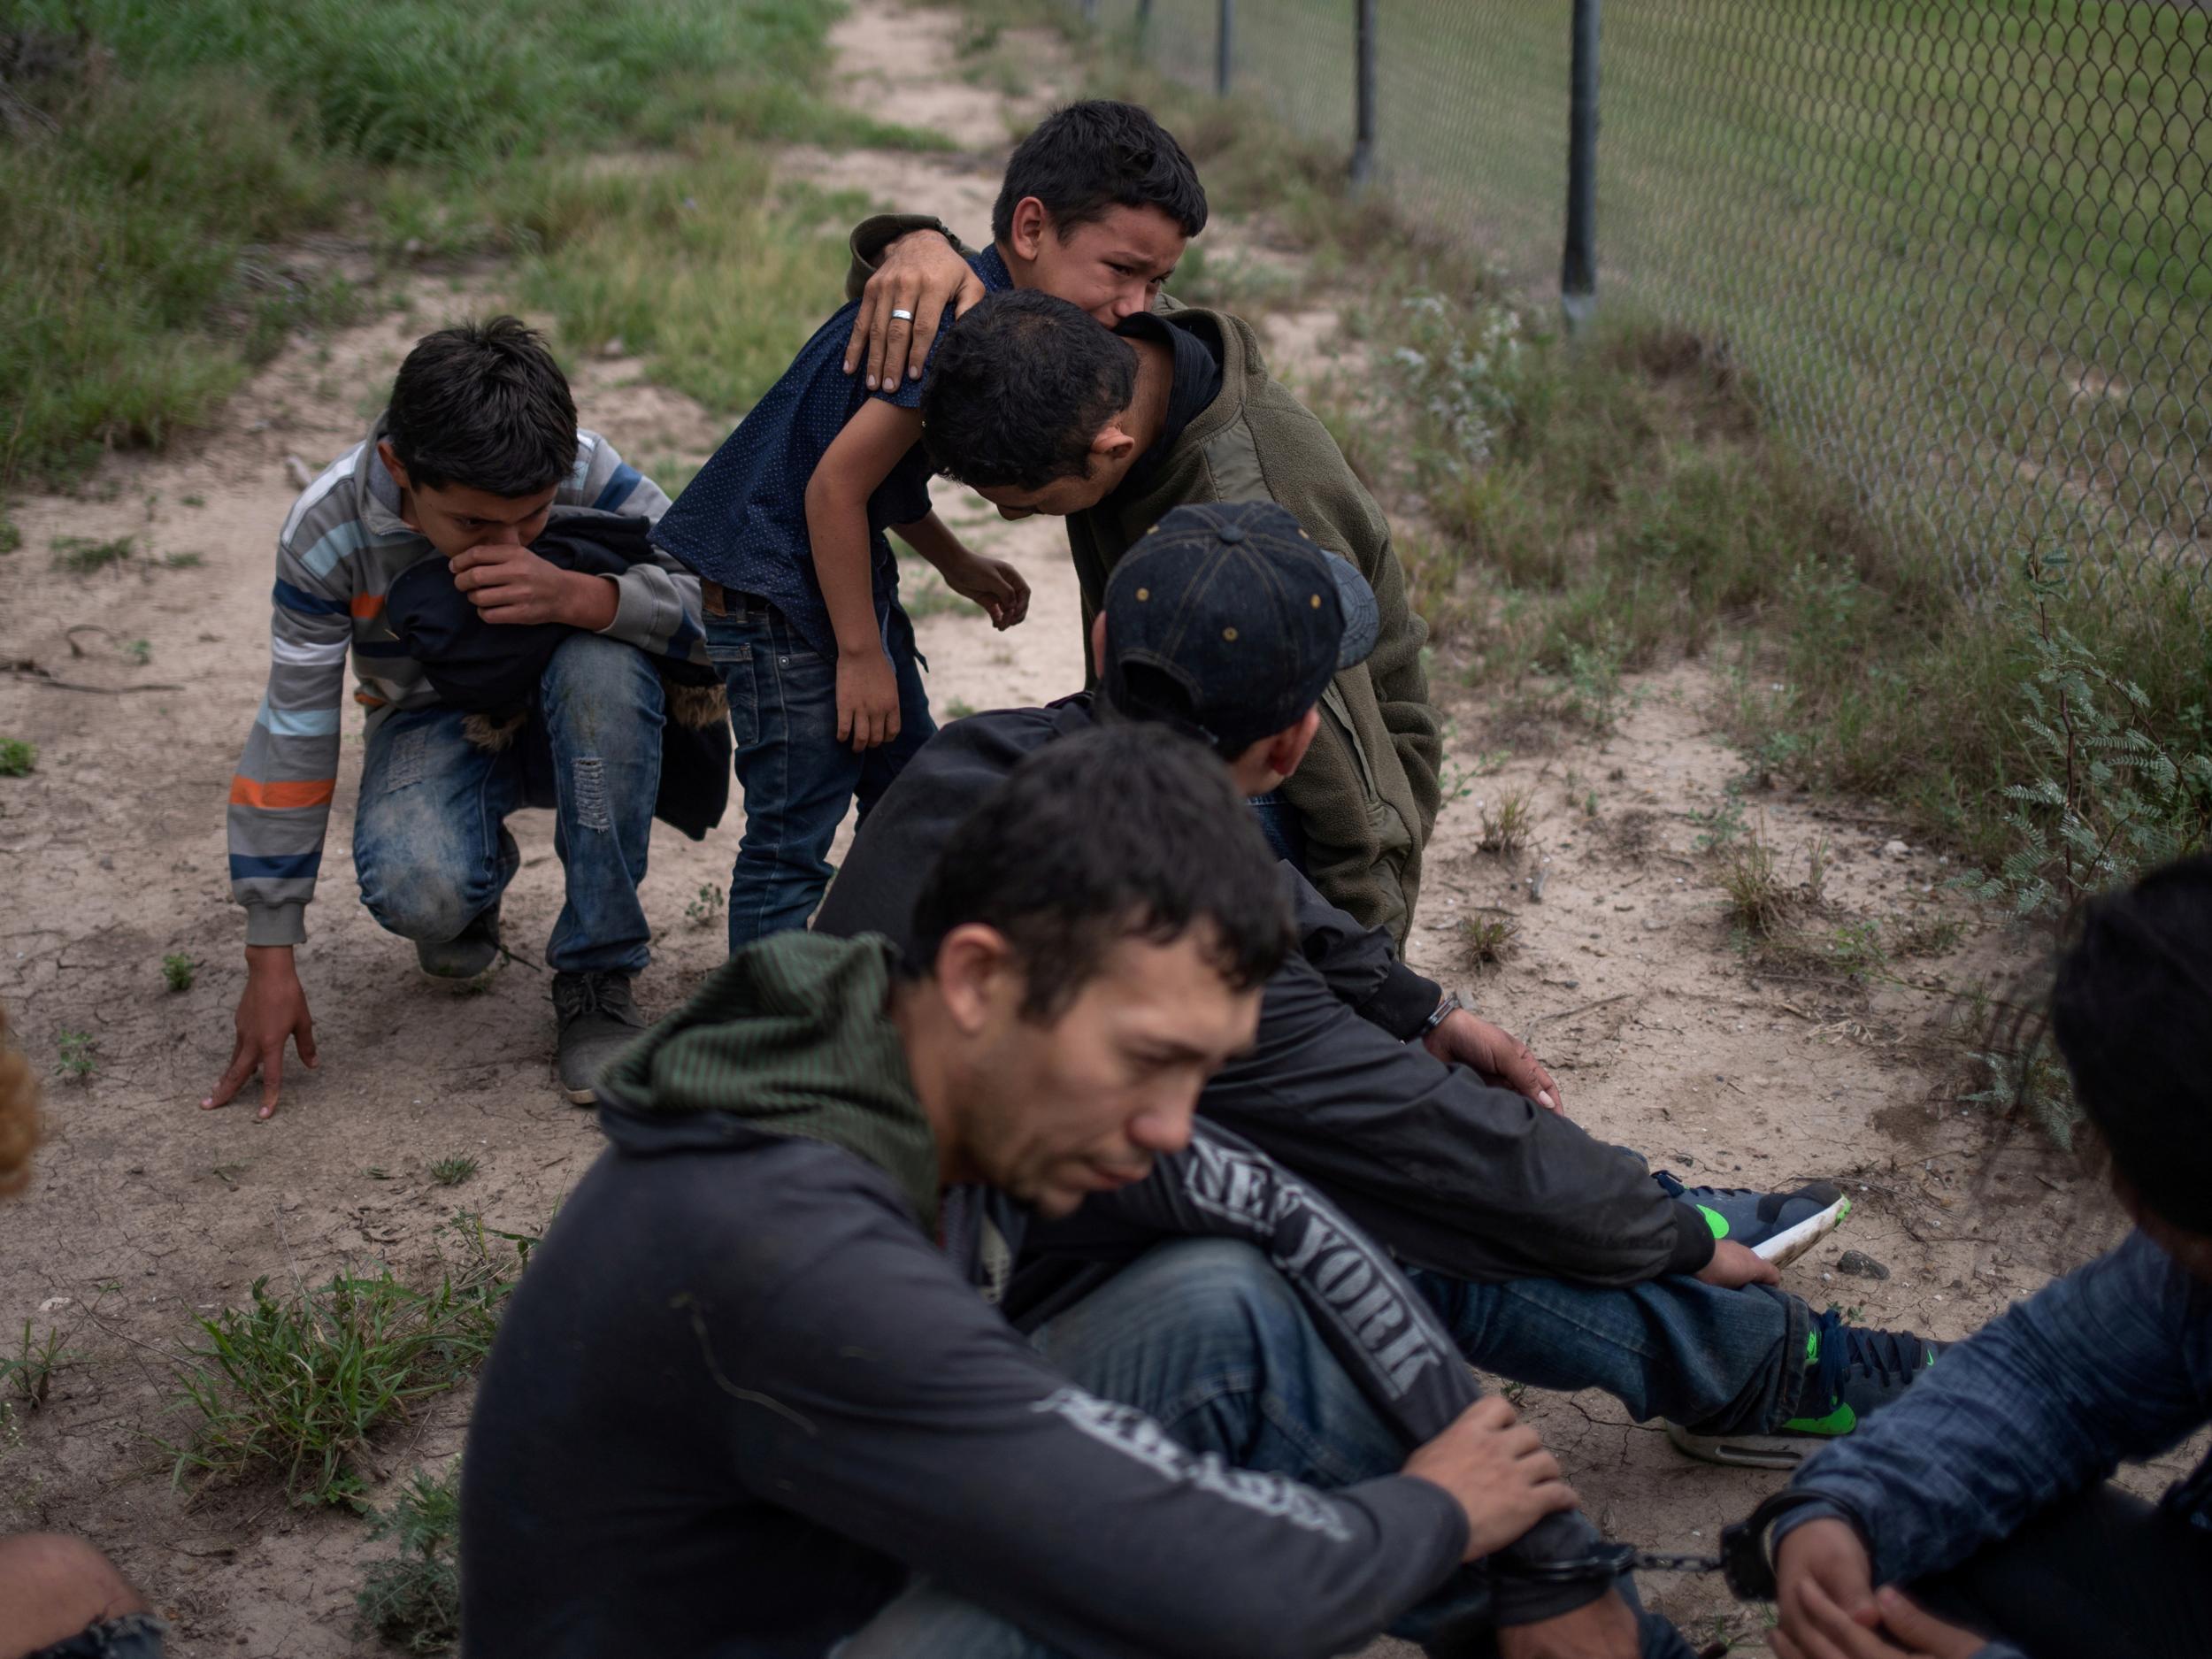 Why migrant parents risk bringing their children to the US border